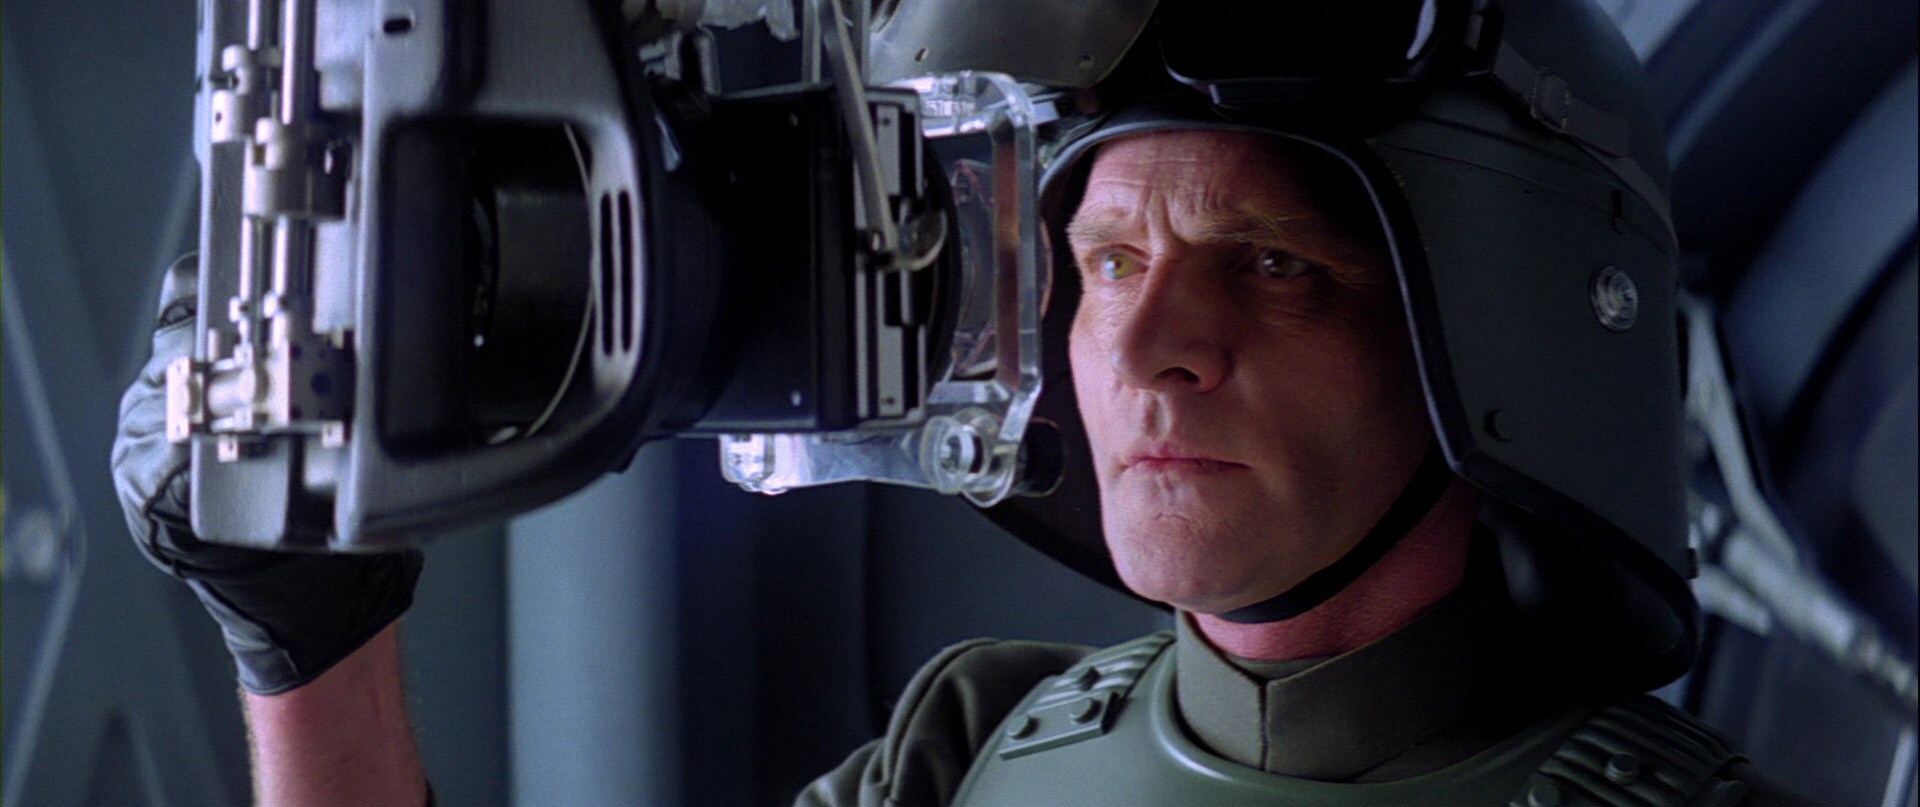 This is our first time seeing Tarkin in action on the field as an Imperial. He wears armor simila...